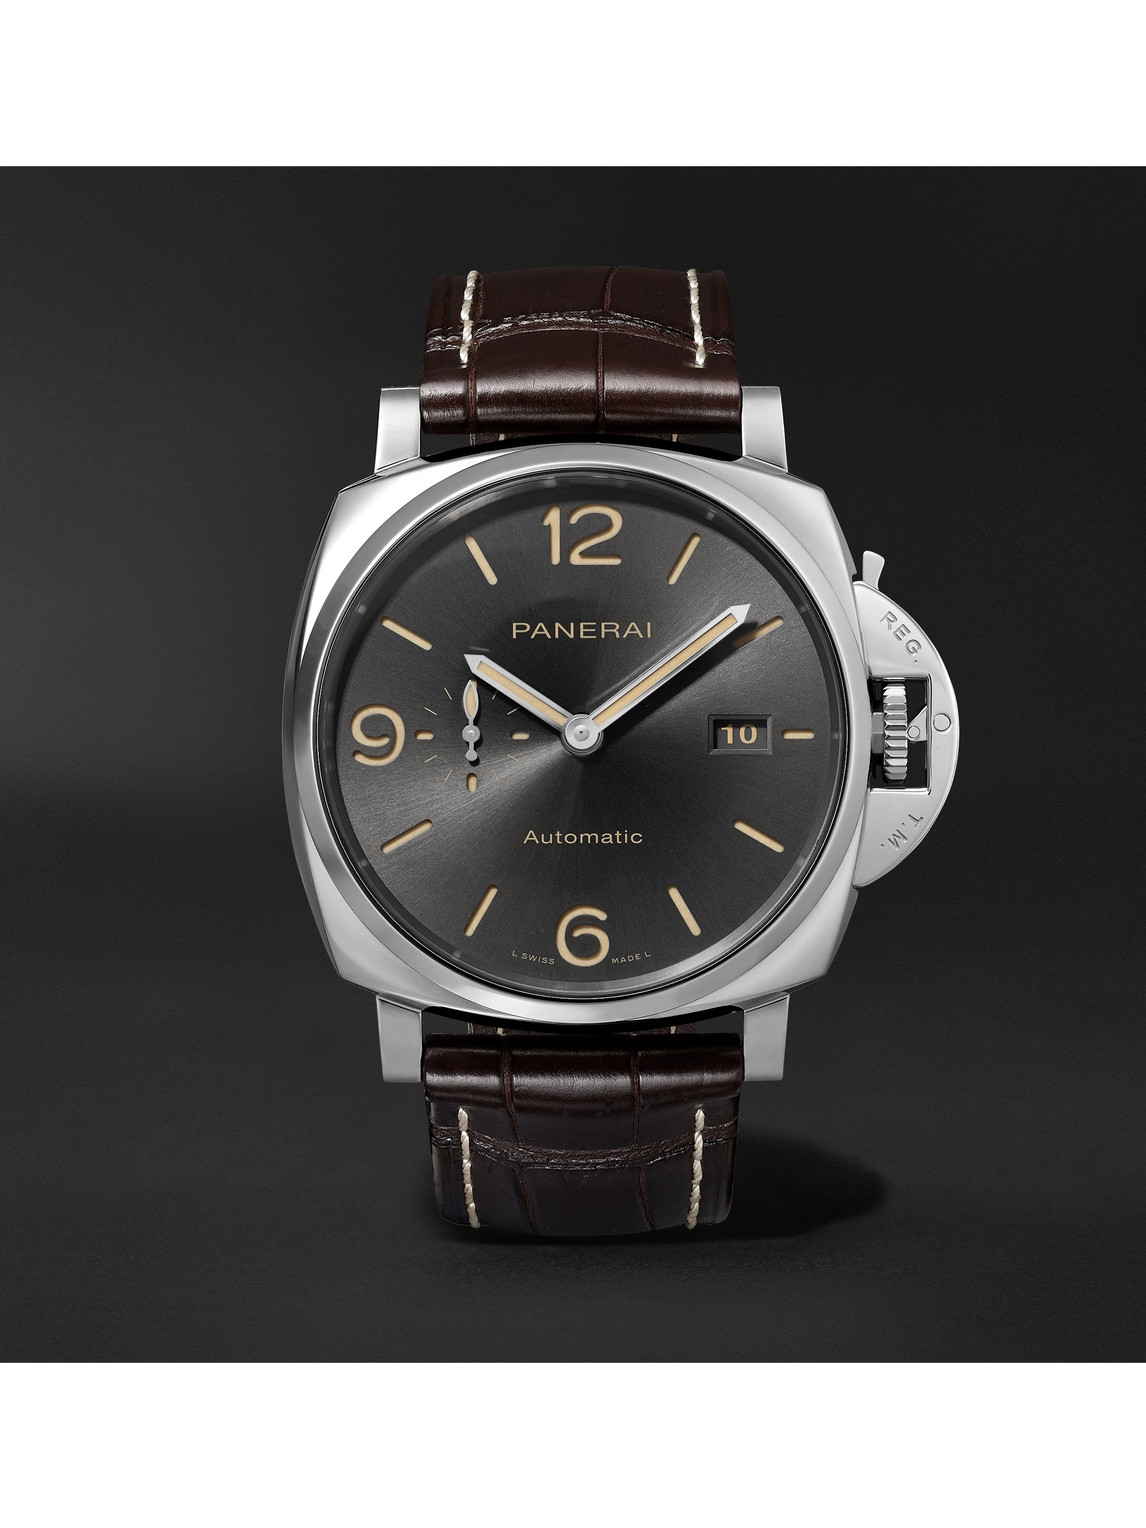 Panerai Luminor Due Automatic 45mm Stainless Steel And Alligator Watch, Ref. No. Pam00943 In Gray